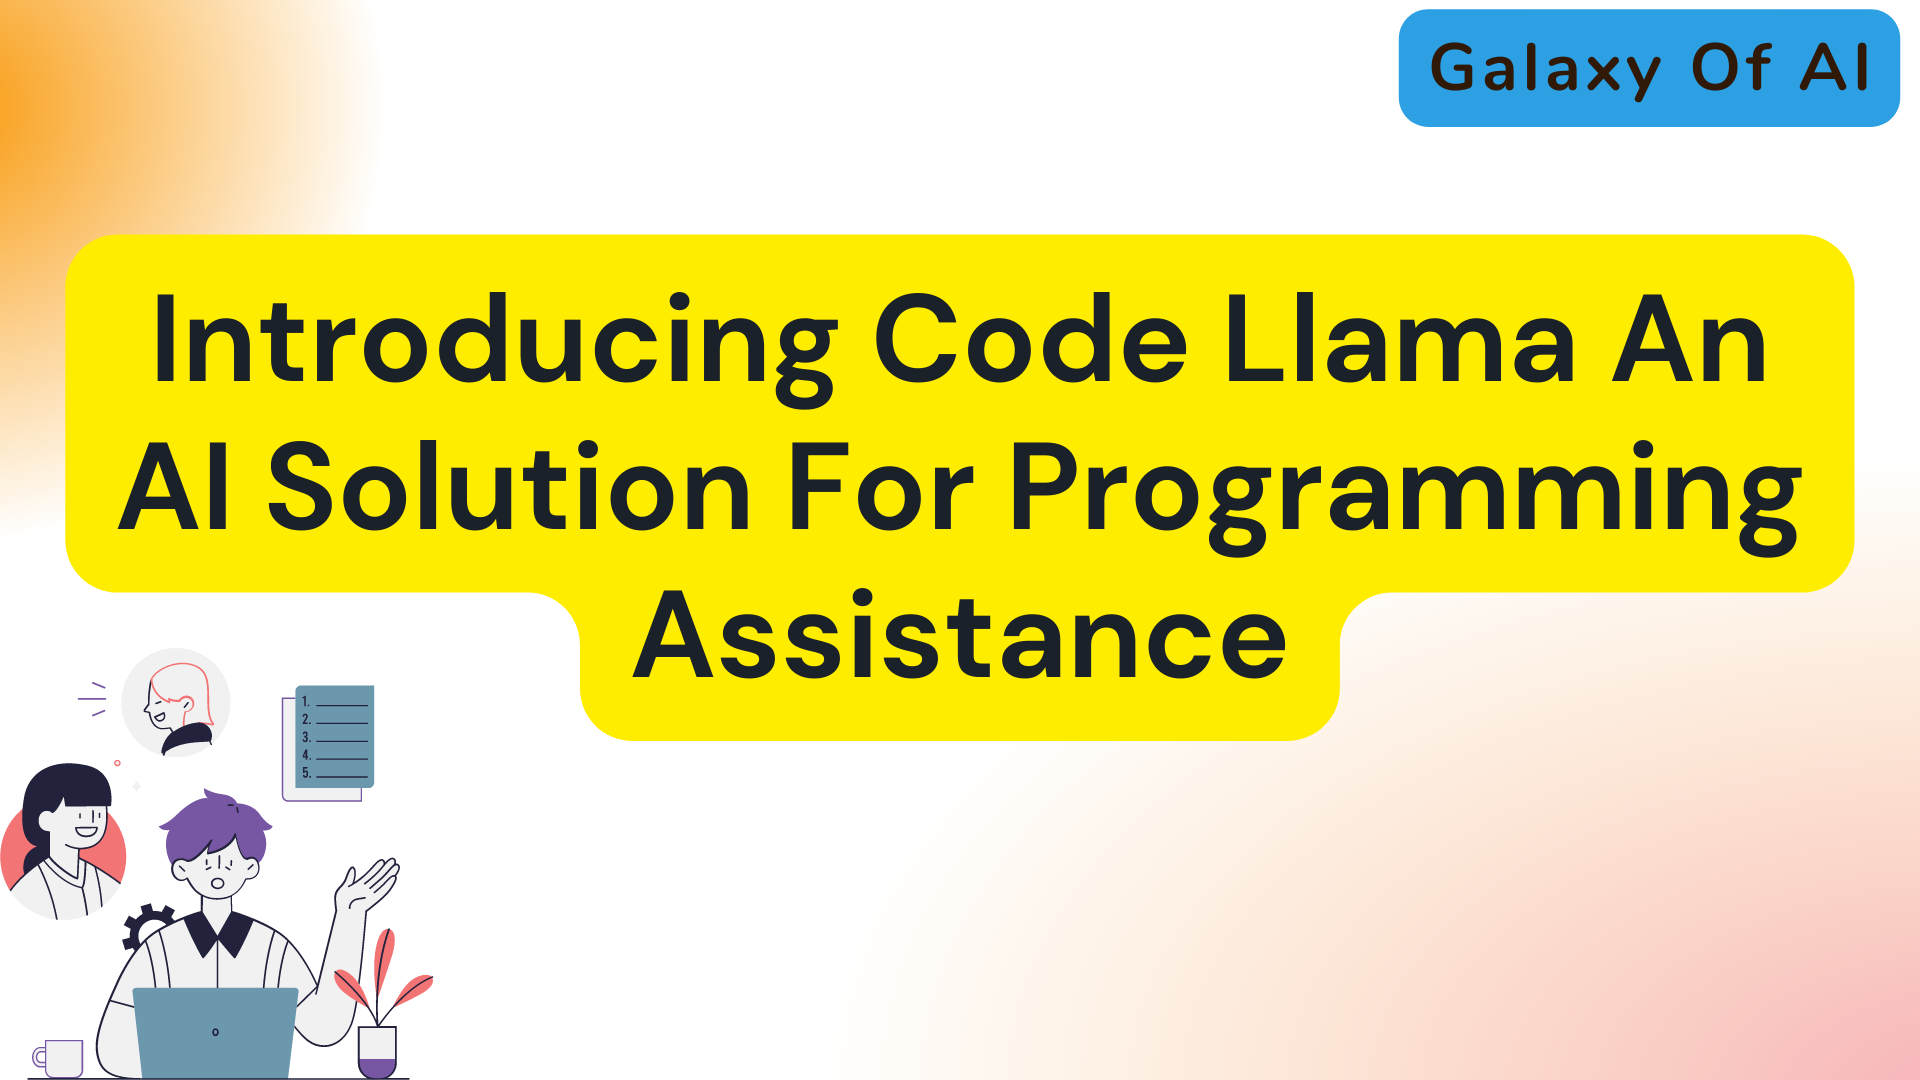 Introducing Code Llama An AI Solution For Programming Assistance